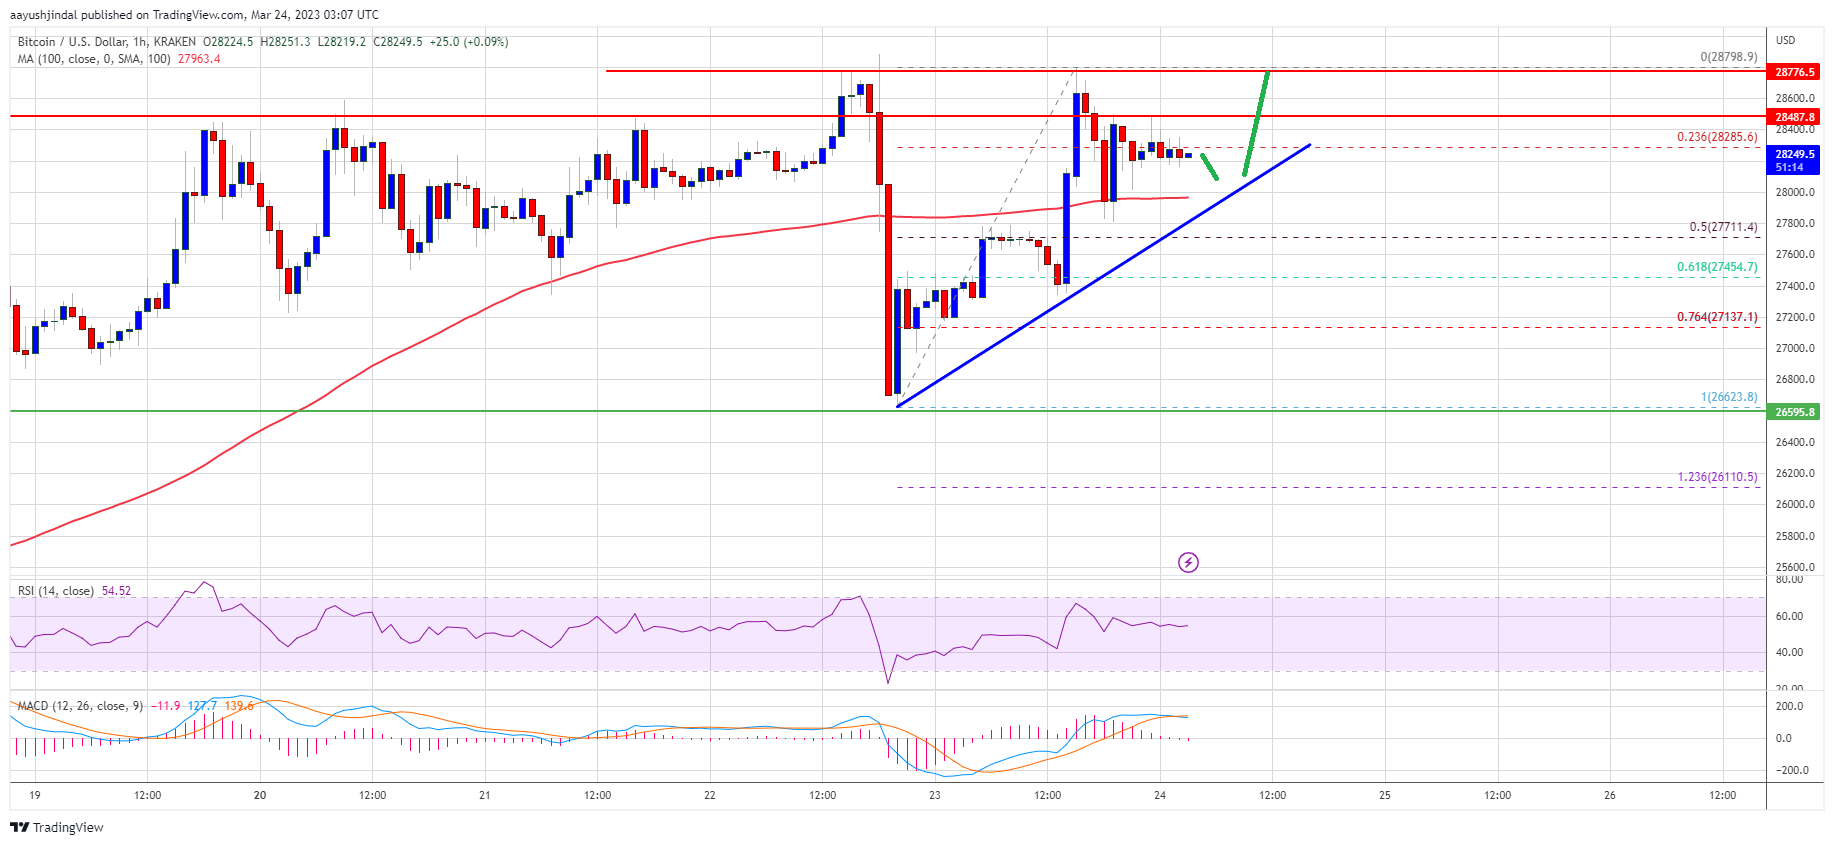 Bitcoin Price Trims Losses But Remains In Range, What Could Trigger Fresh Rally